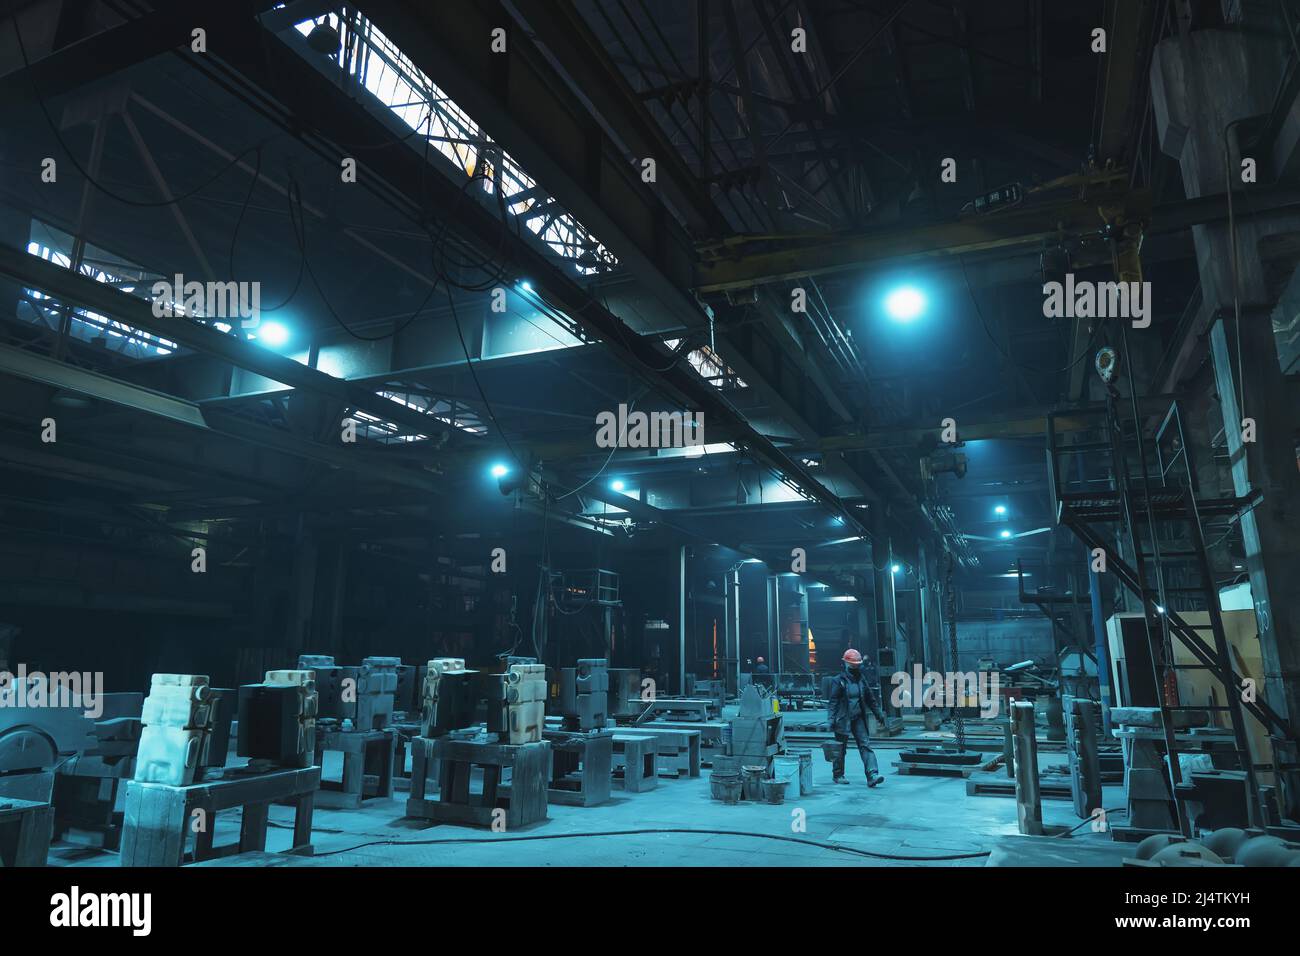 Heavy Industry, industrial production of metal manufacturing in foundry factory, workshop with molds. Stock Photo